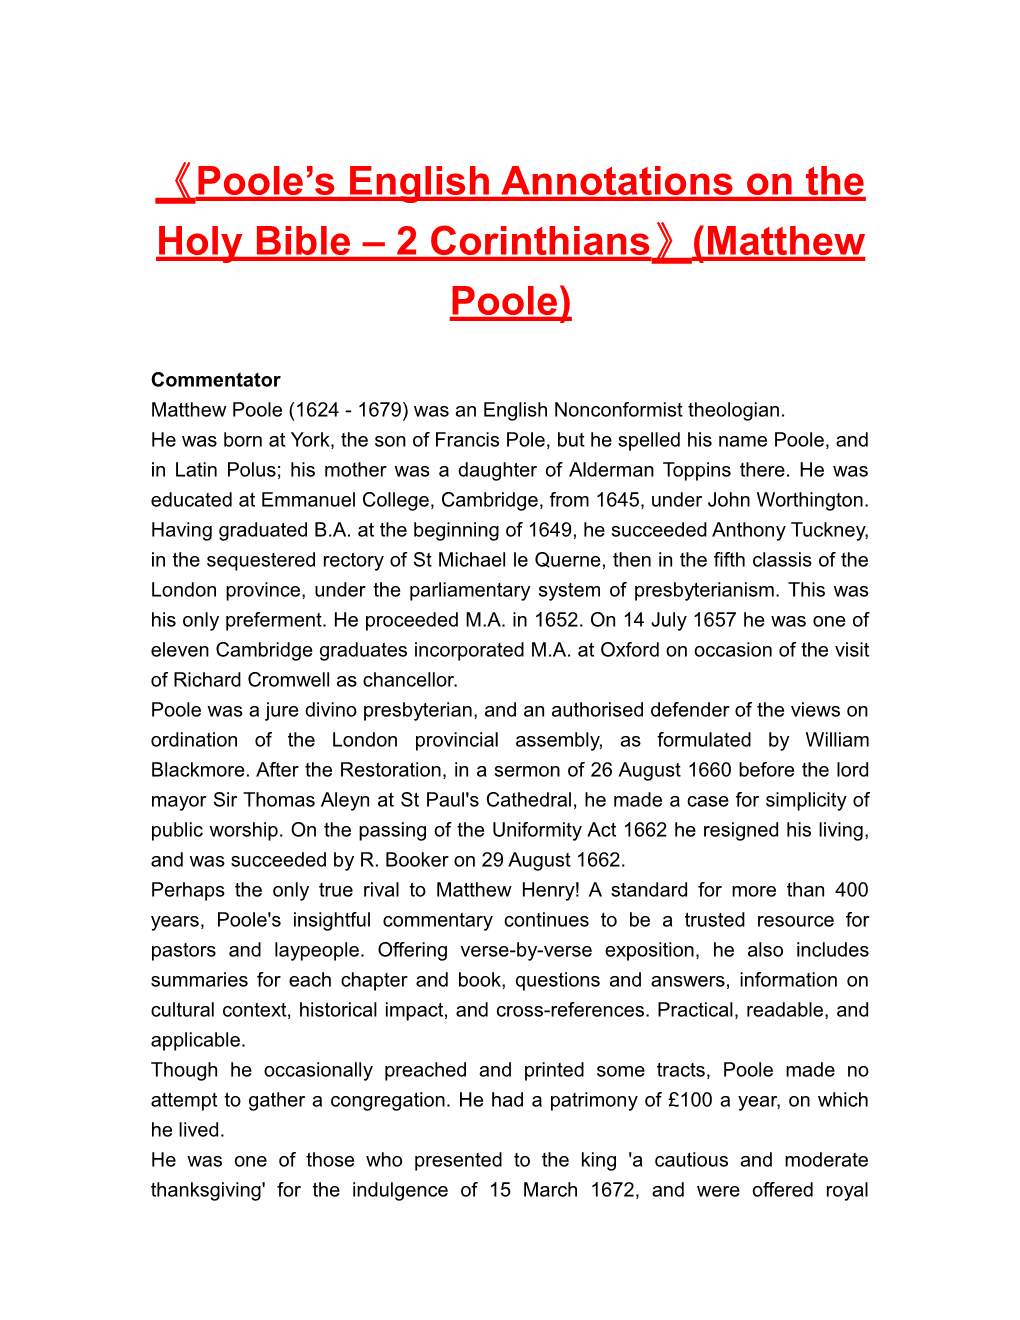 Poole S English Annotations on the Holy Bible 2 Corinthians (Matthew Poole)